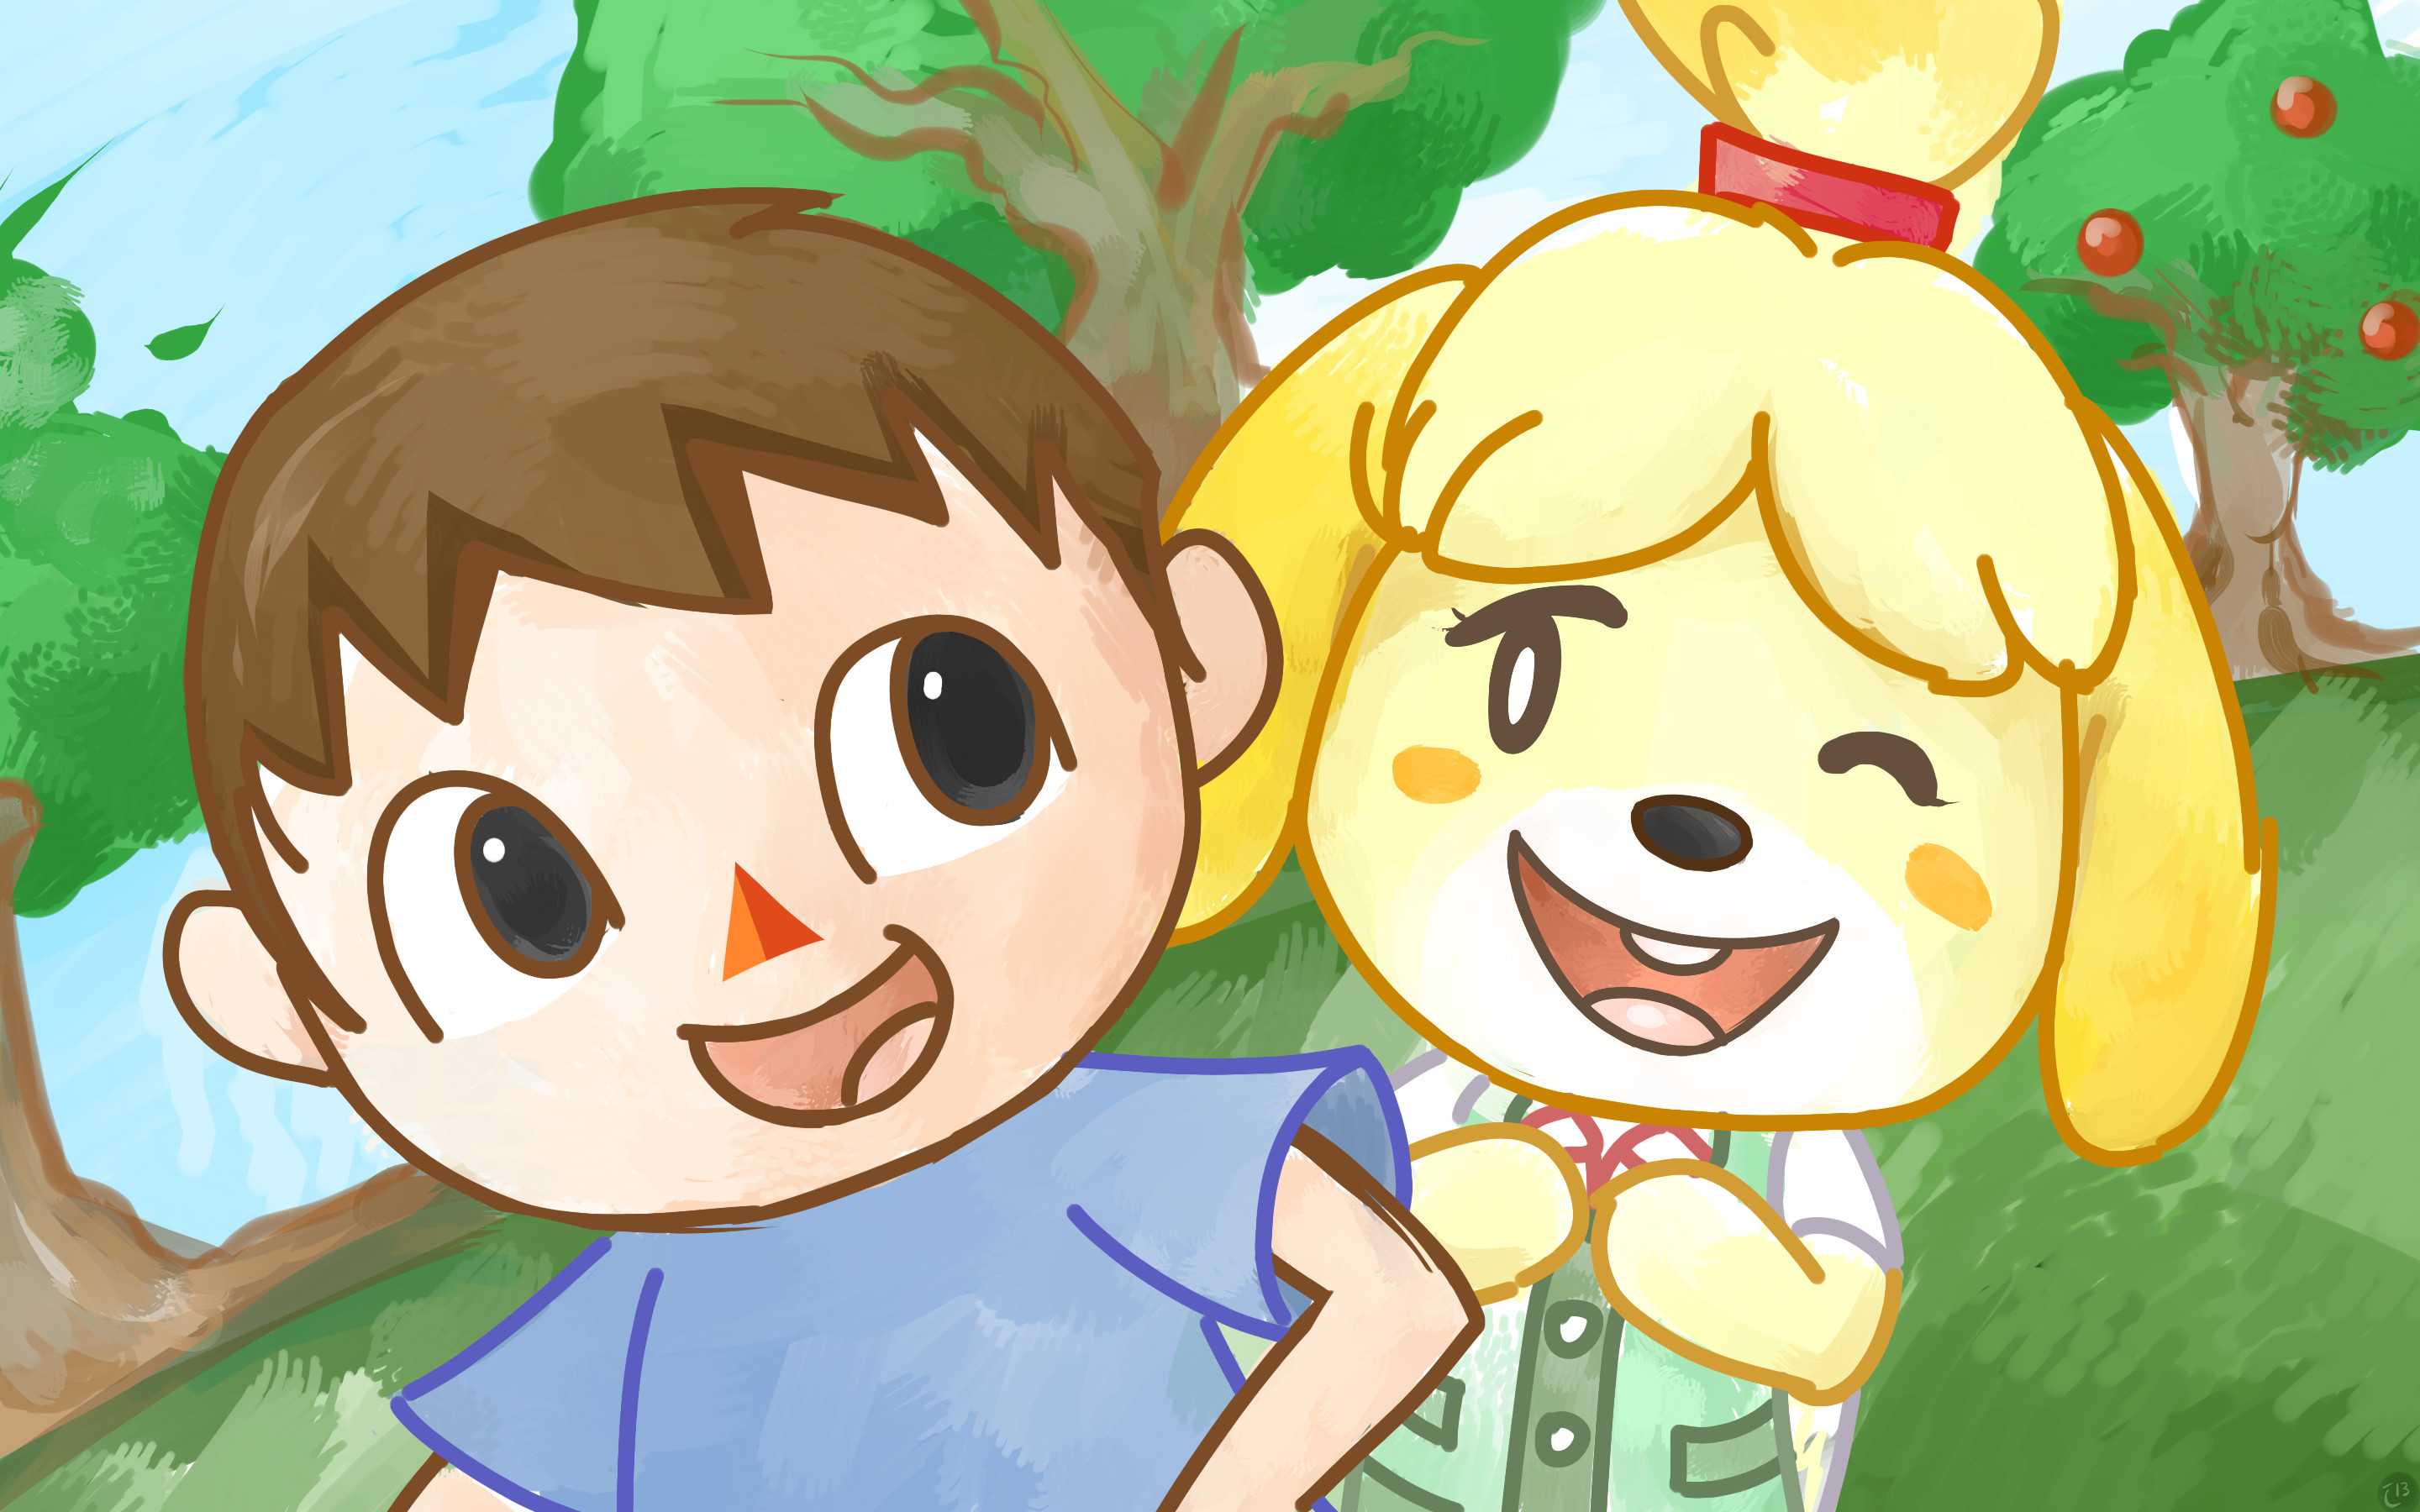 Isabelle (Animal Crossing) images 9c0b45aee3c052ce0cbab3424ae47512 d69tvuk HD  wallpaper and background photos